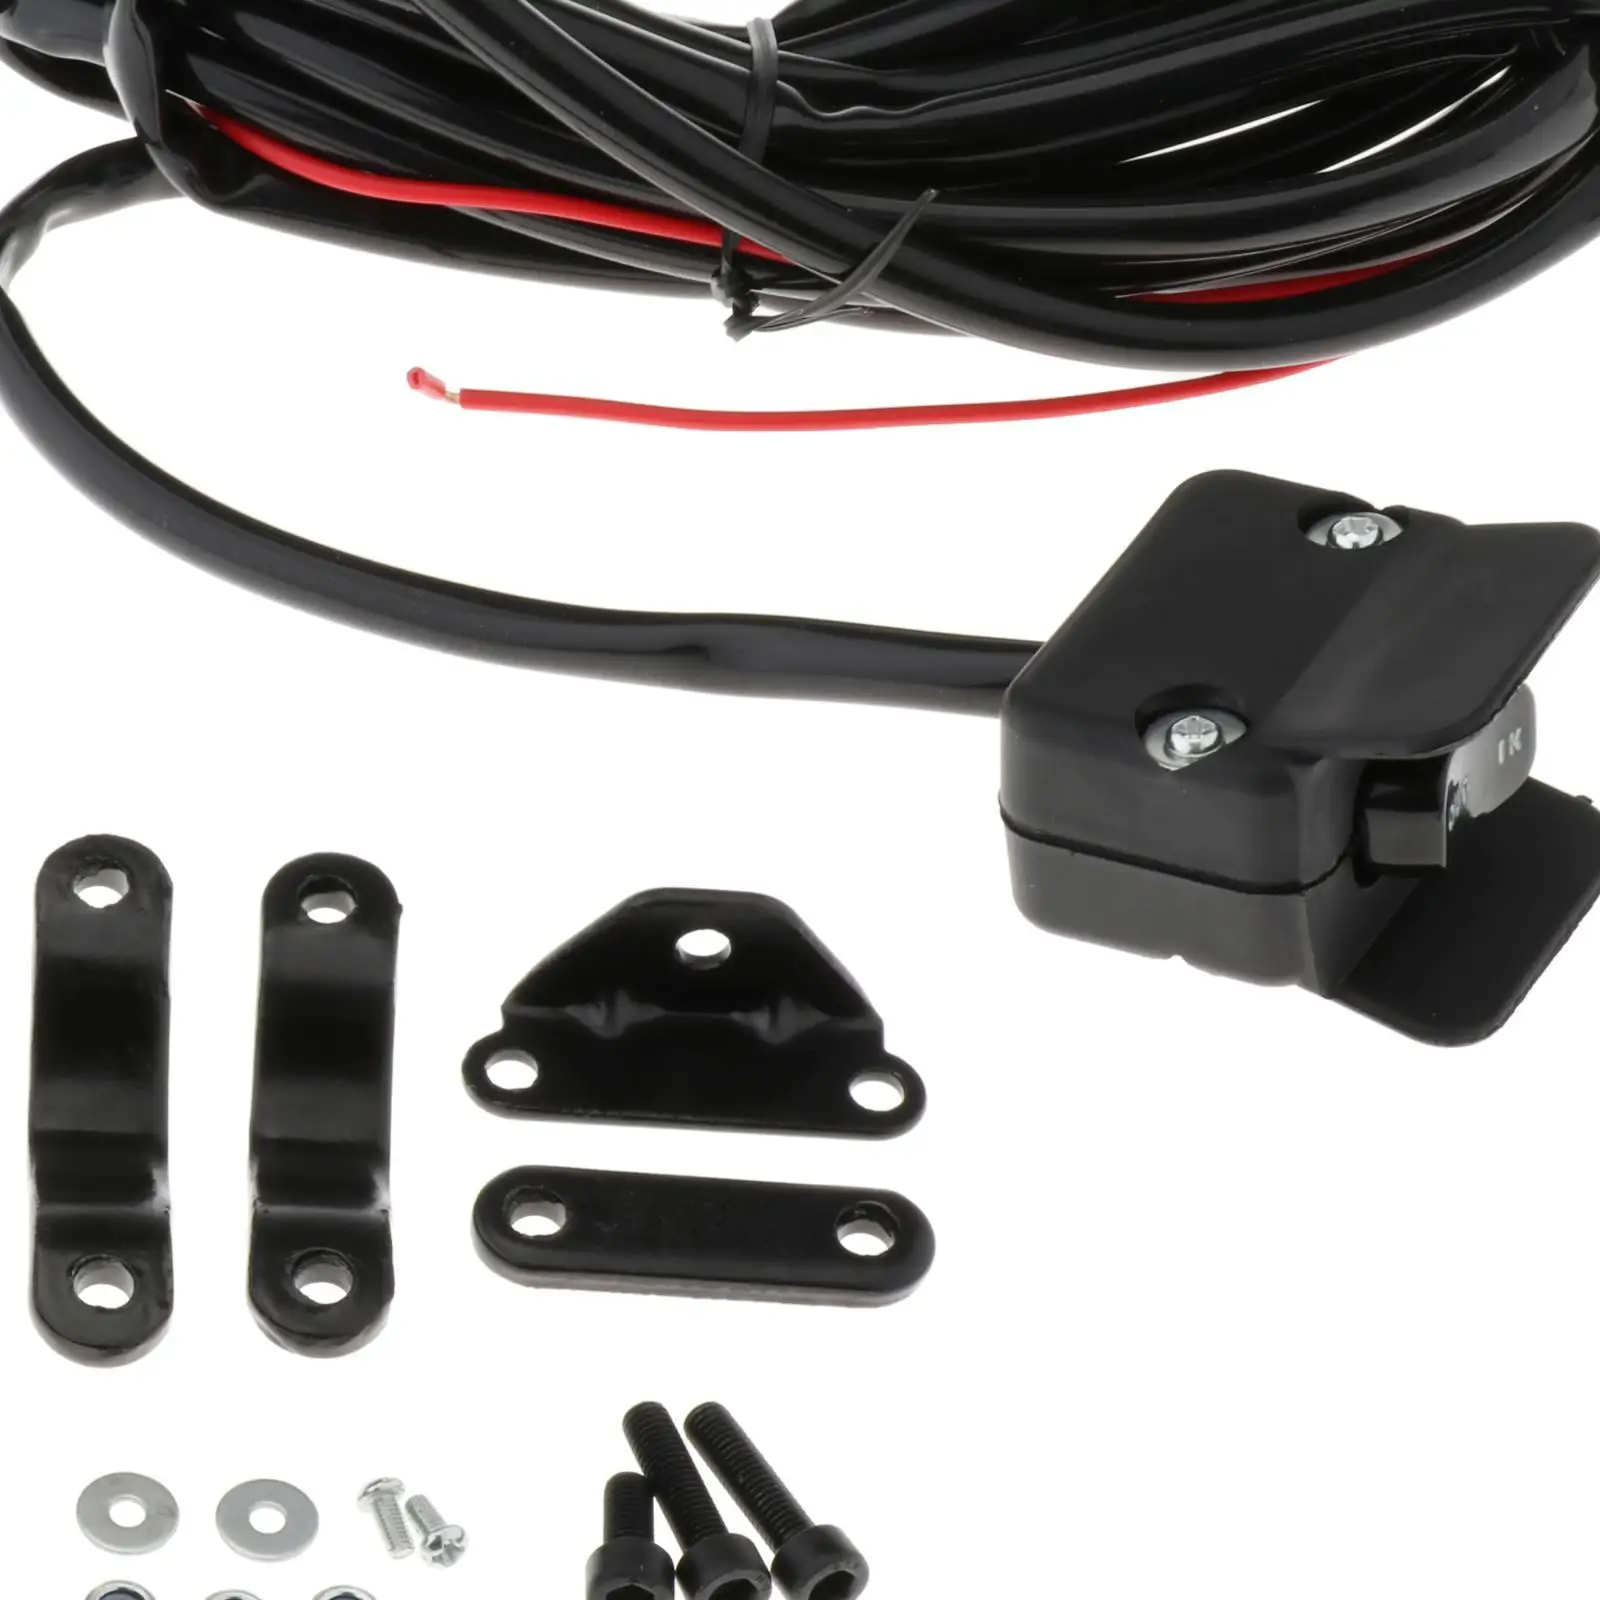 12V Winch Rocker Thumb Switch & Mounting Bracket Set for ATV Accessories